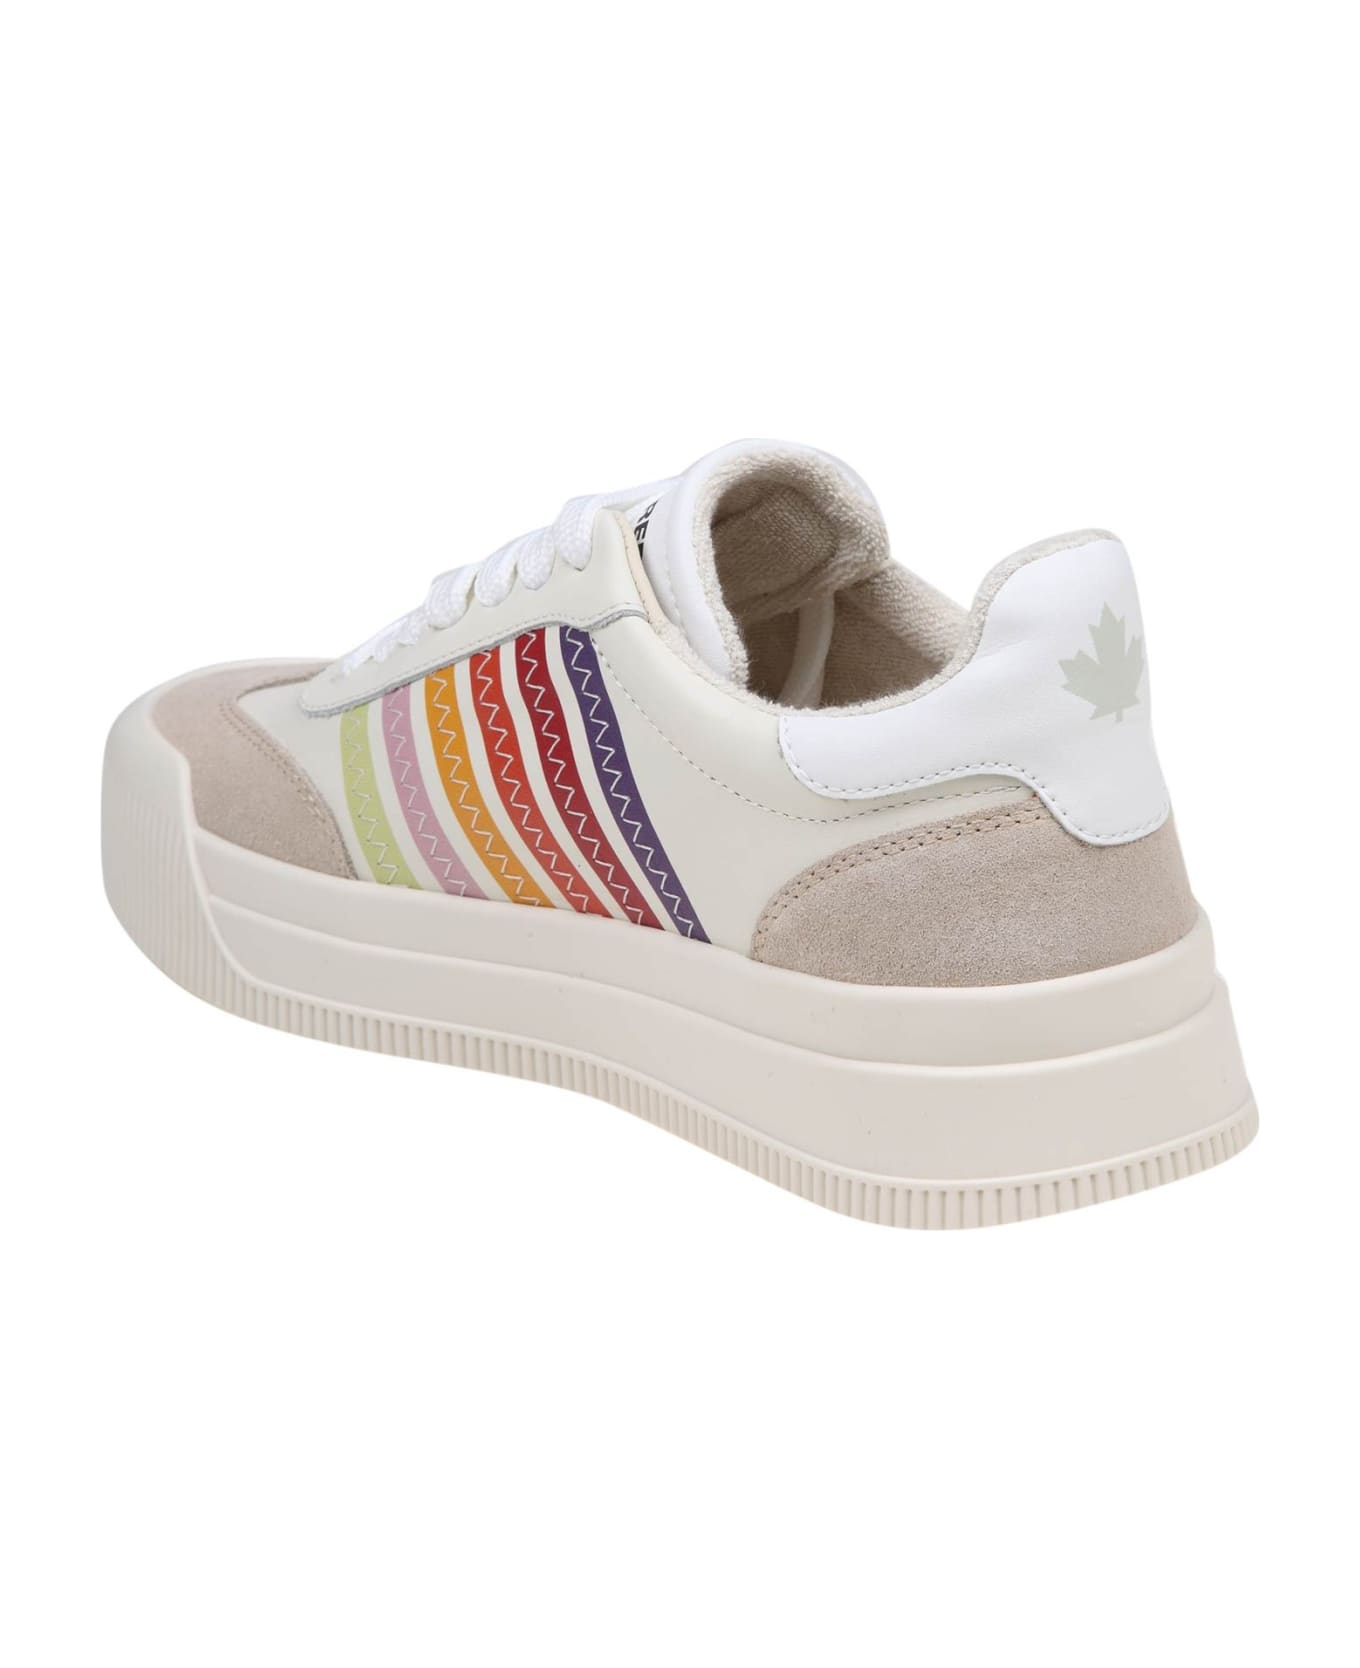 Dsquared2 New Jersey Sneakers - white/multicolor